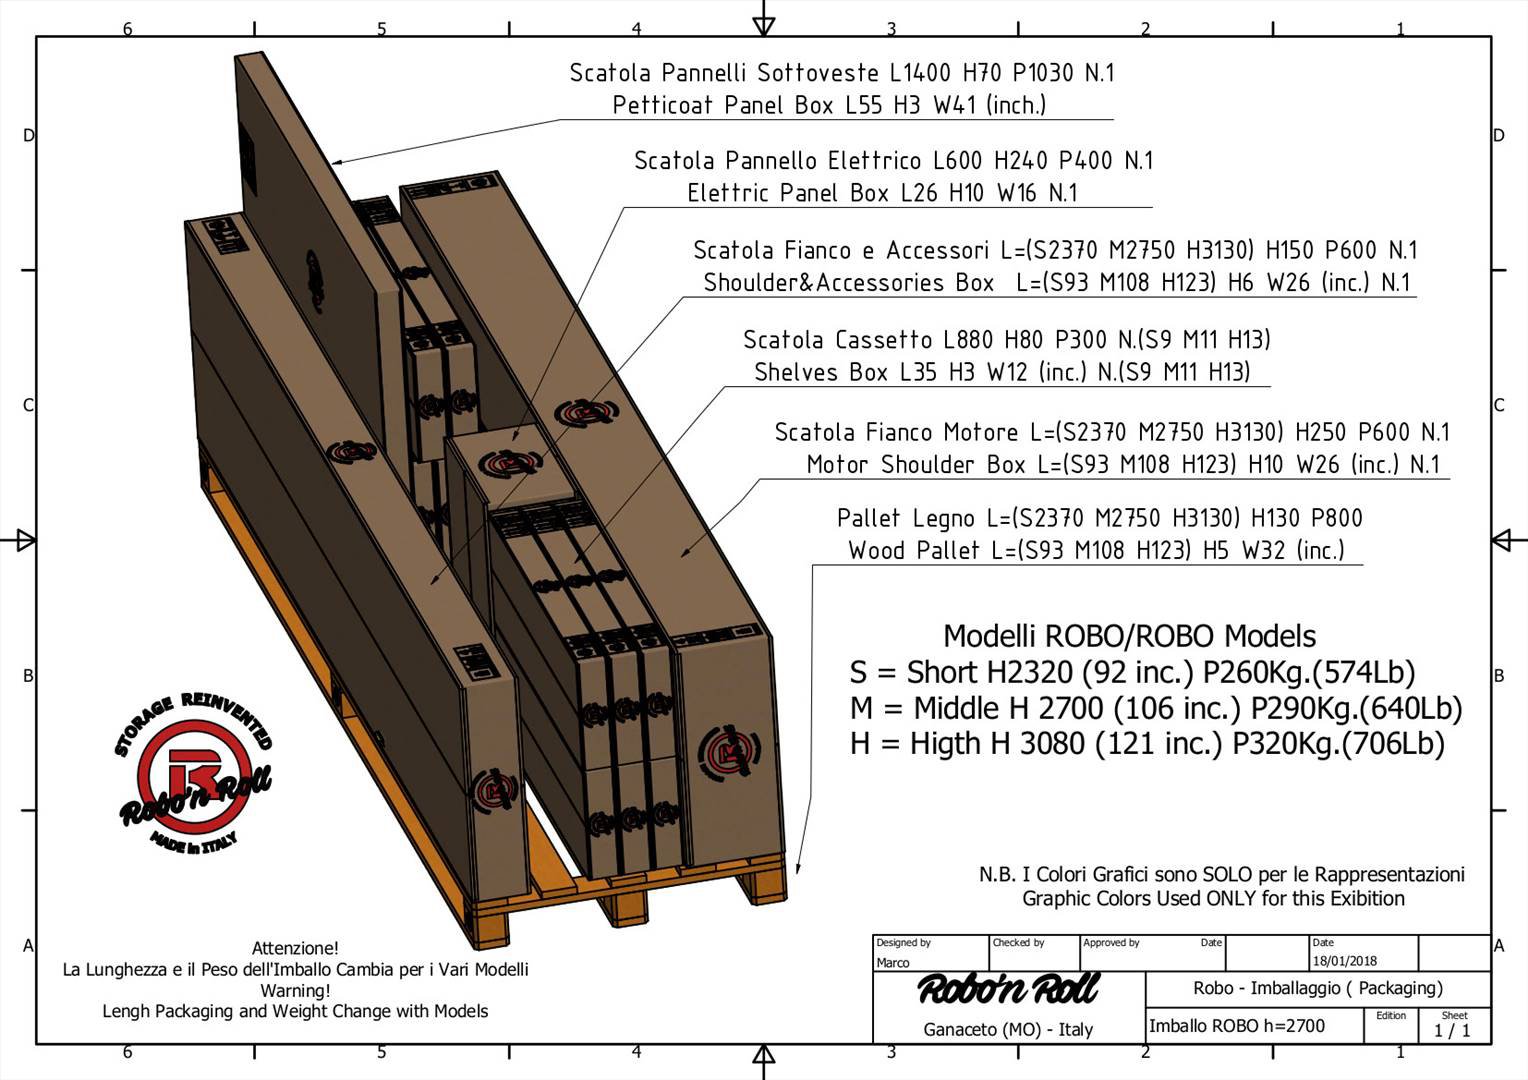 Pallet and boxes sizes